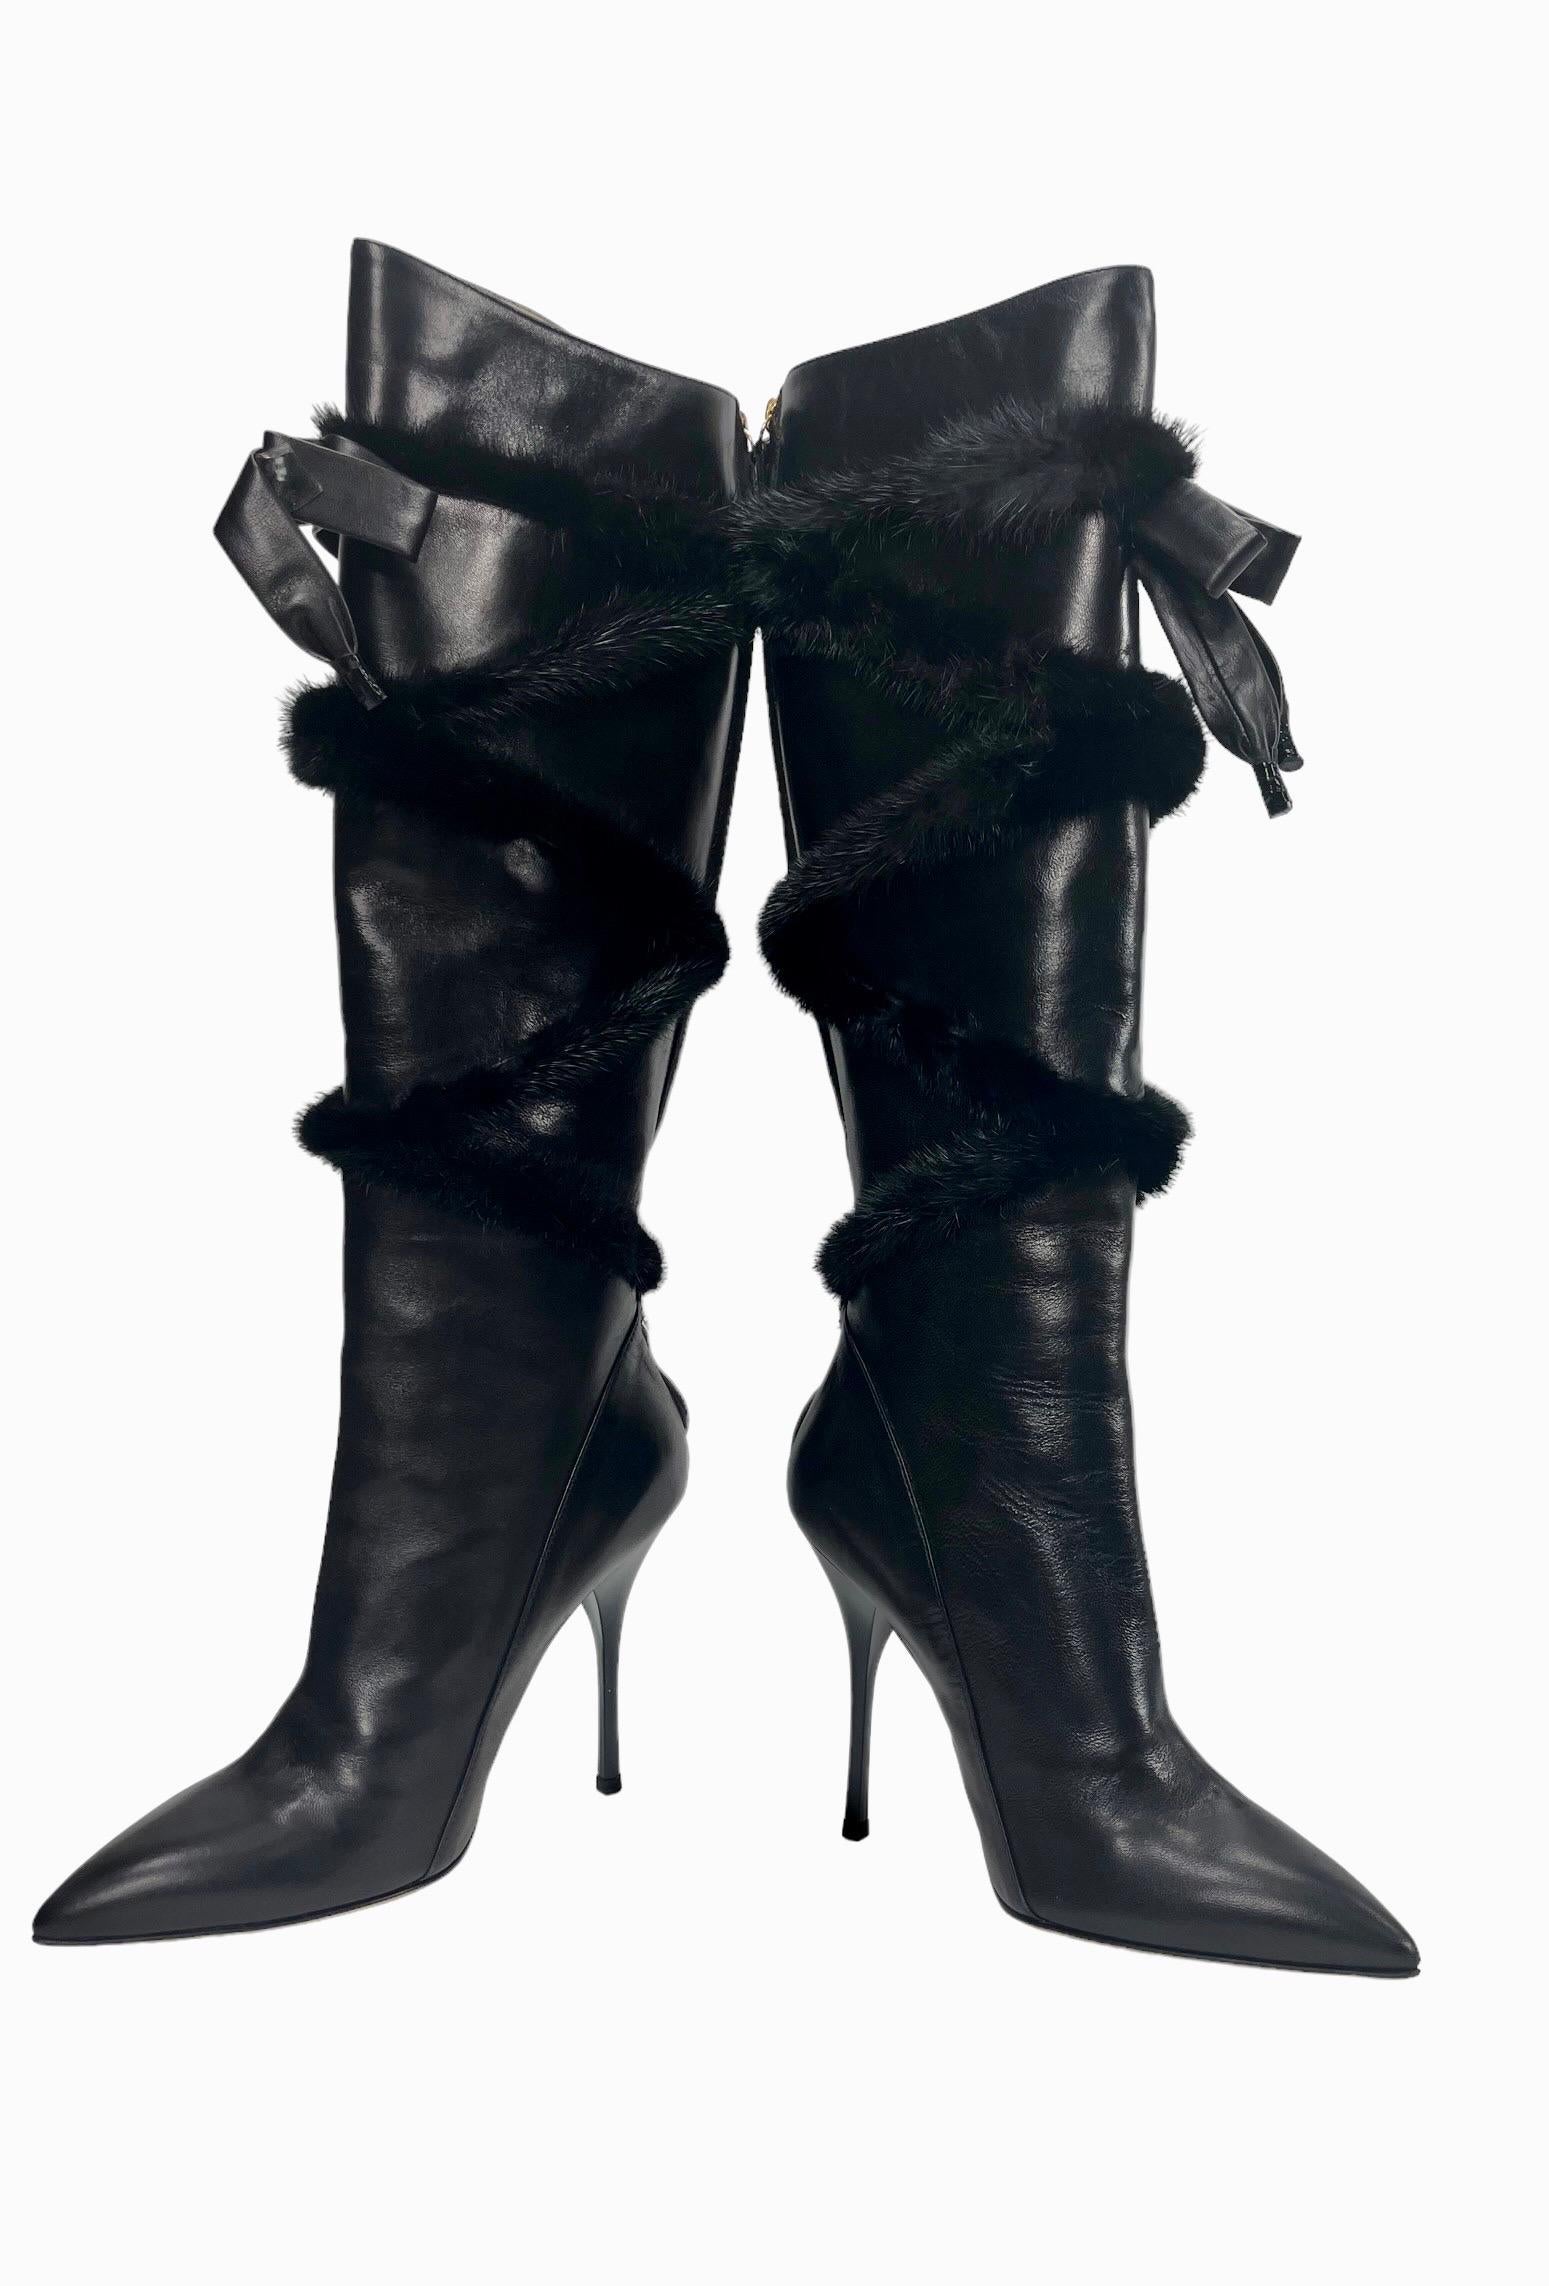 New Roberto Cavalli Black Leather Knee High Boots with Mink  
Italian 37 - US 7 
100% Leather upper, Genuine mink fur, Leather bow. Lining: Smooth 100% leather in gold. Gold Leather sole. Back zip for easy on/off.
Heel height: 4.5 inches, Height of